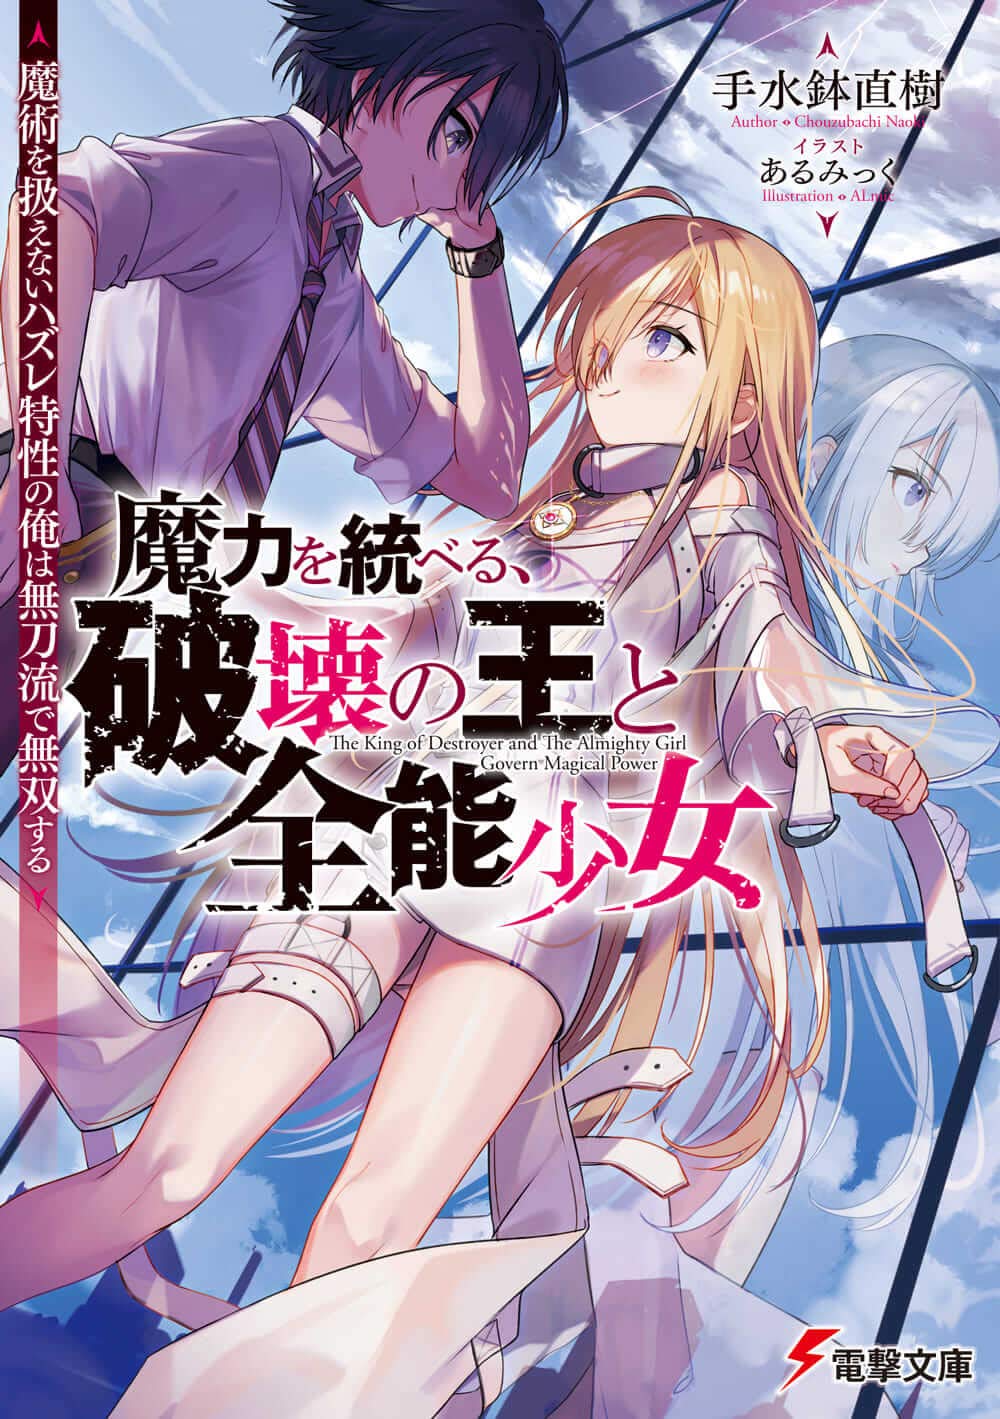 Mahou Shoujo Magical Destroyers (Magical Destroyers) · AniList